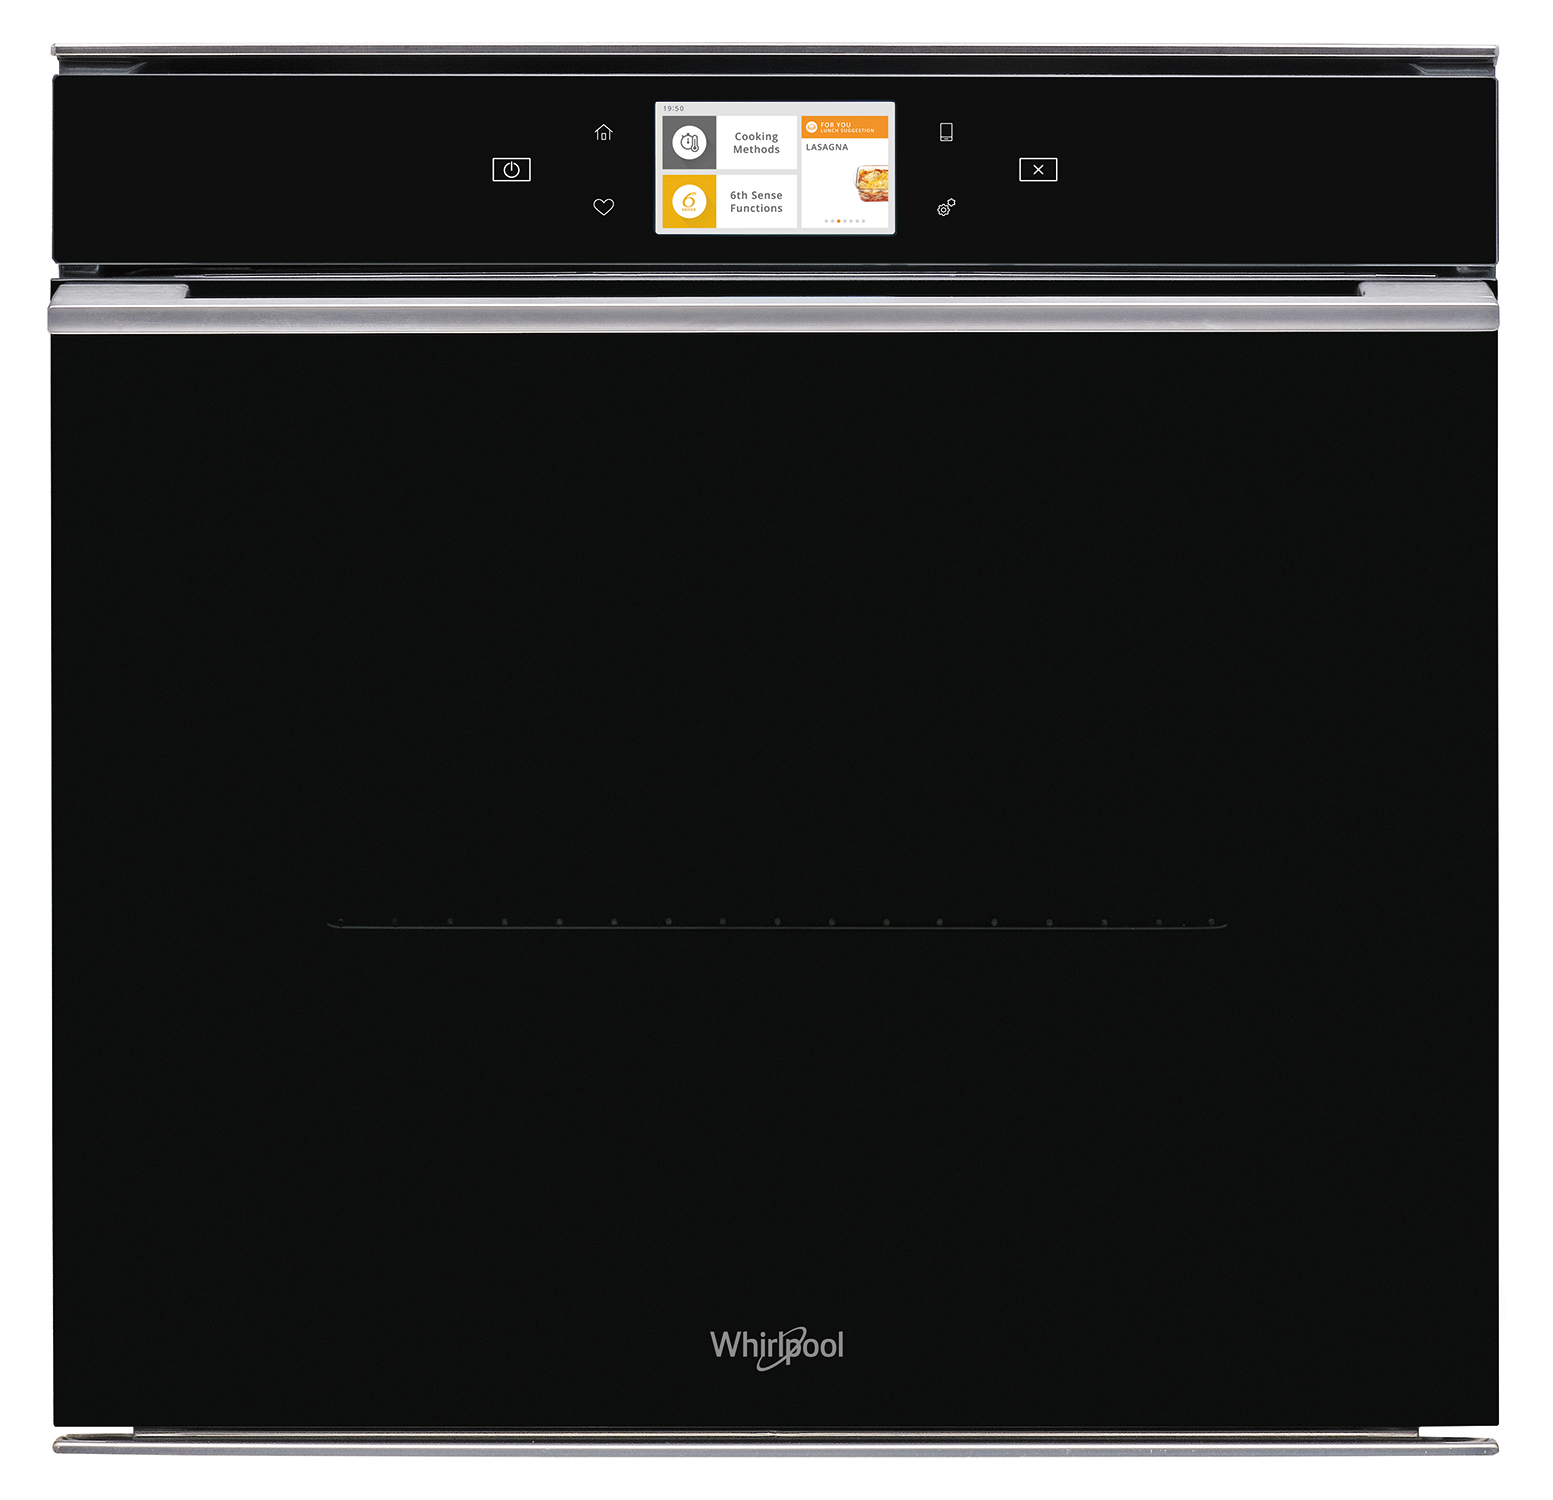 Whirlpool Built-In Collection W11 Steam Oven